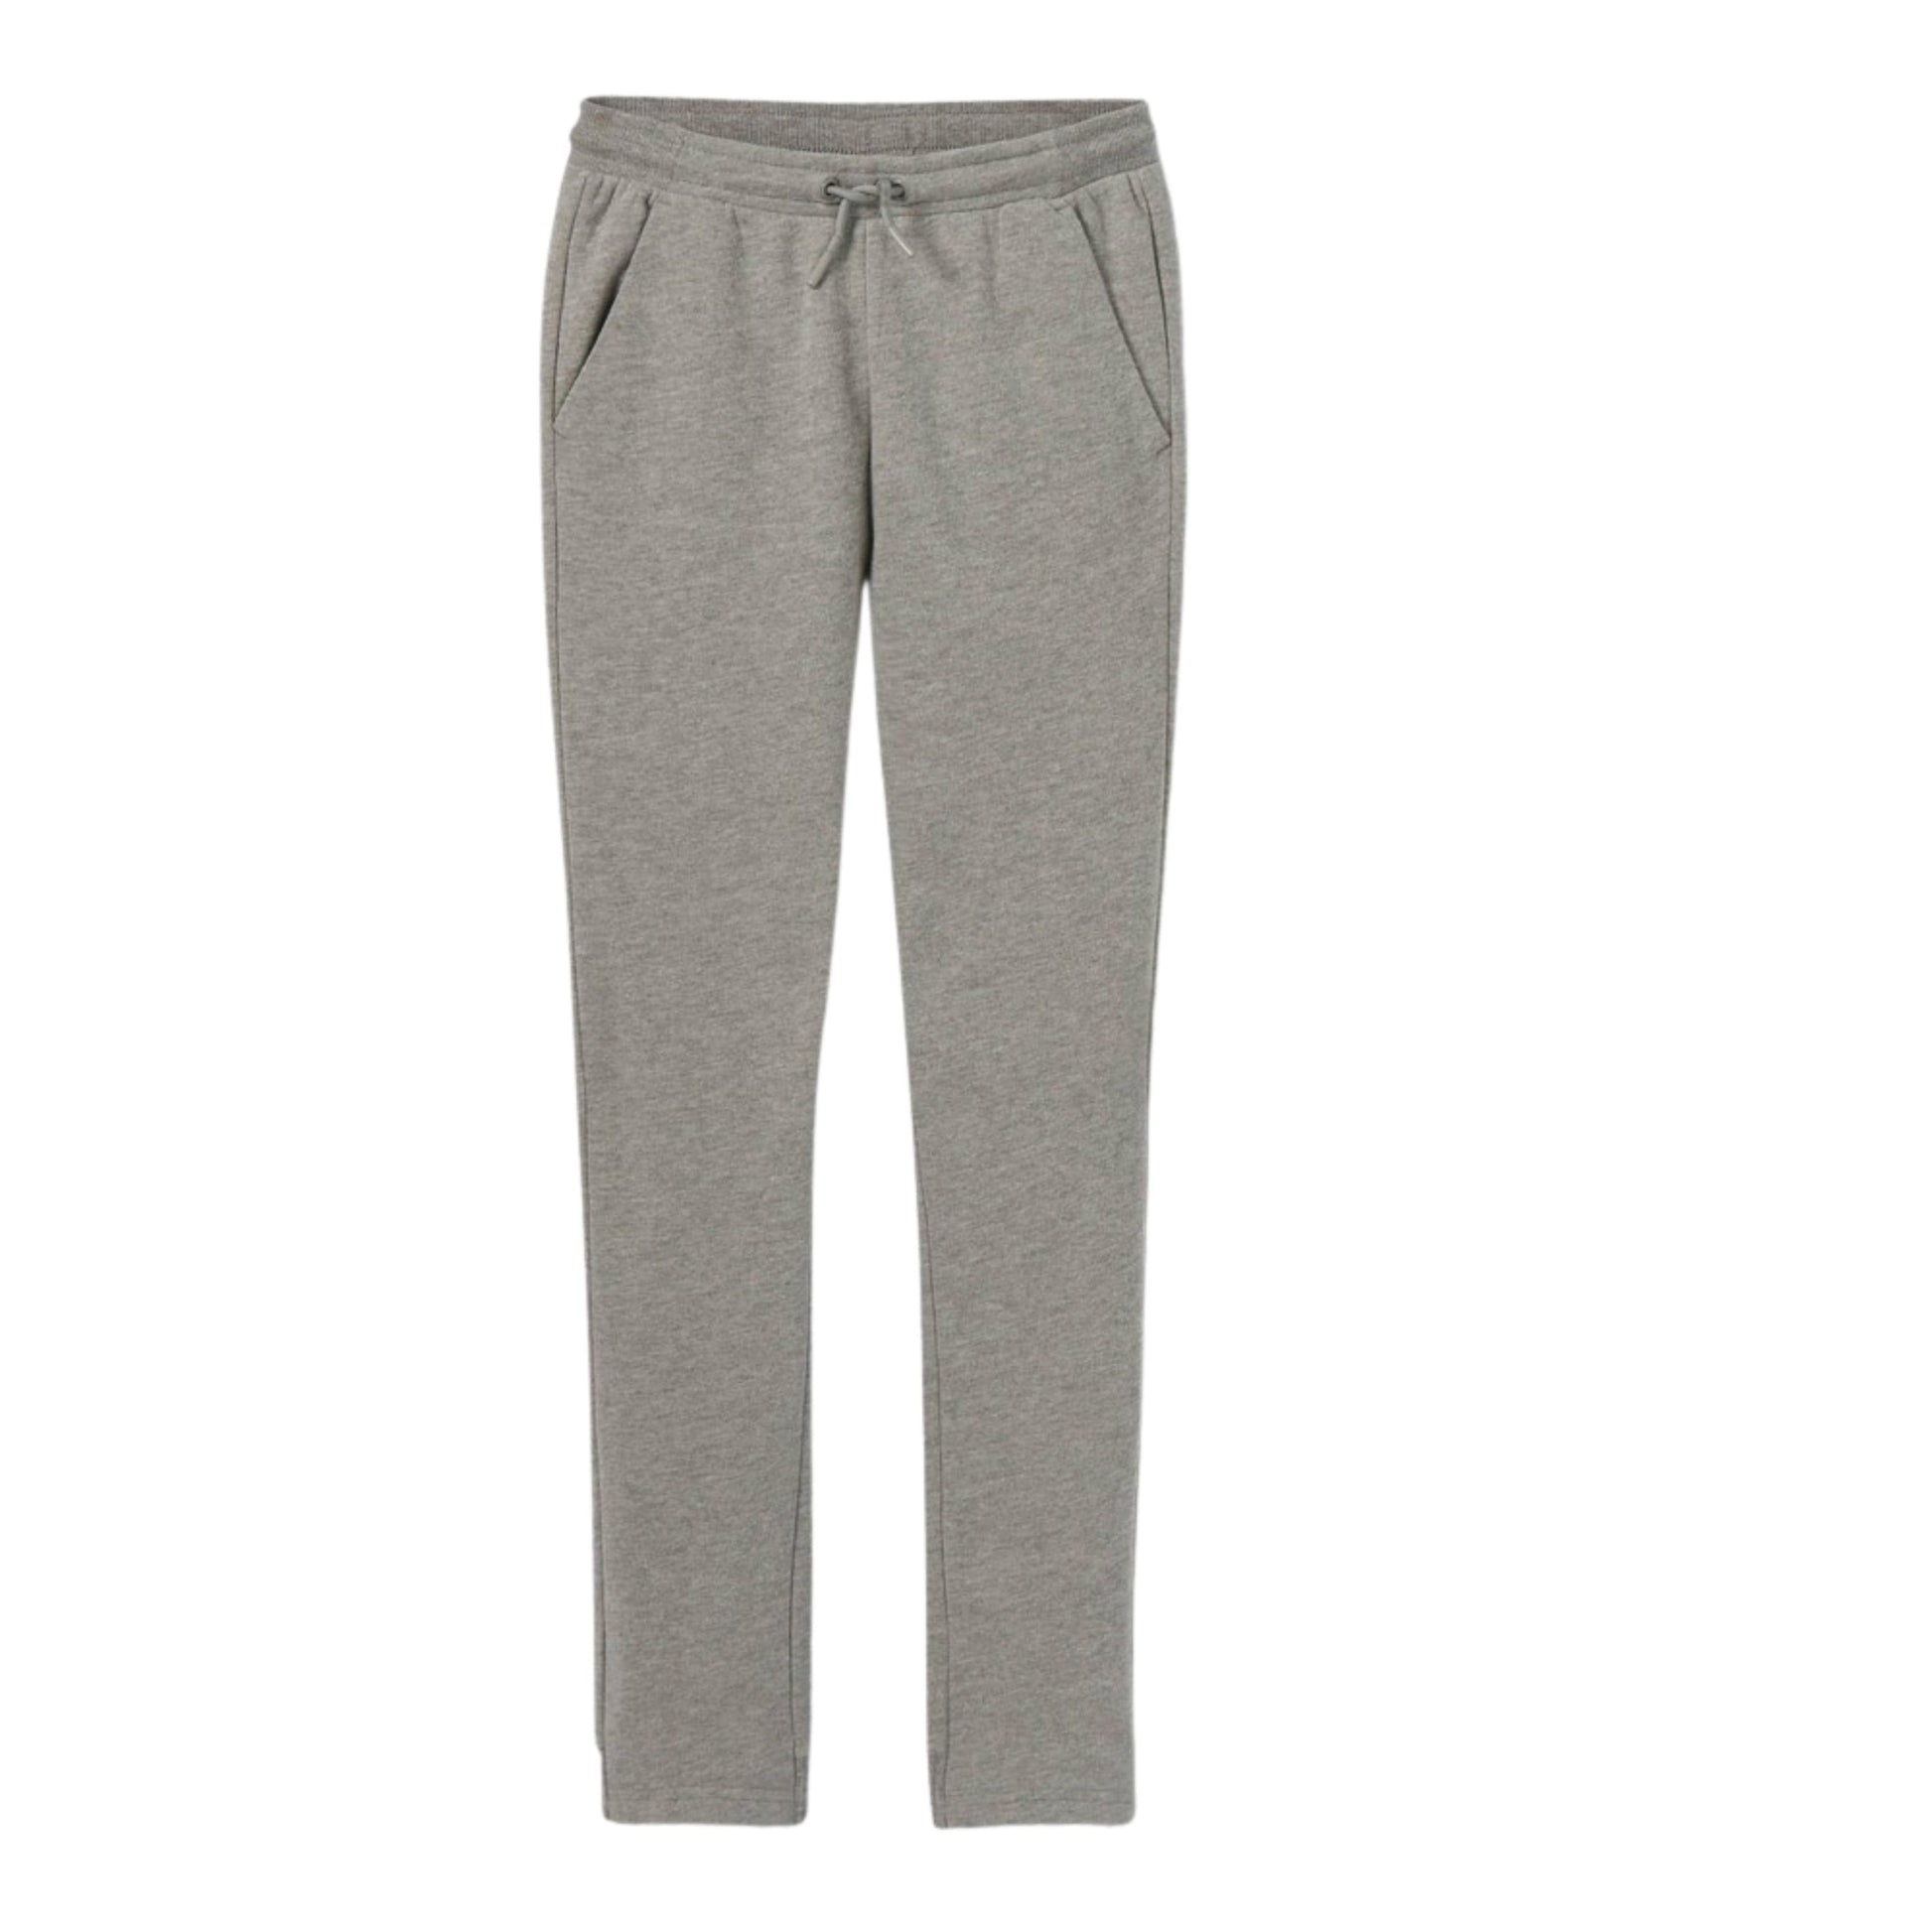 ALL IN MOTION Boys Bottoms M / Grey ALL IN MOTION - Fleece Joggers Sweatpants